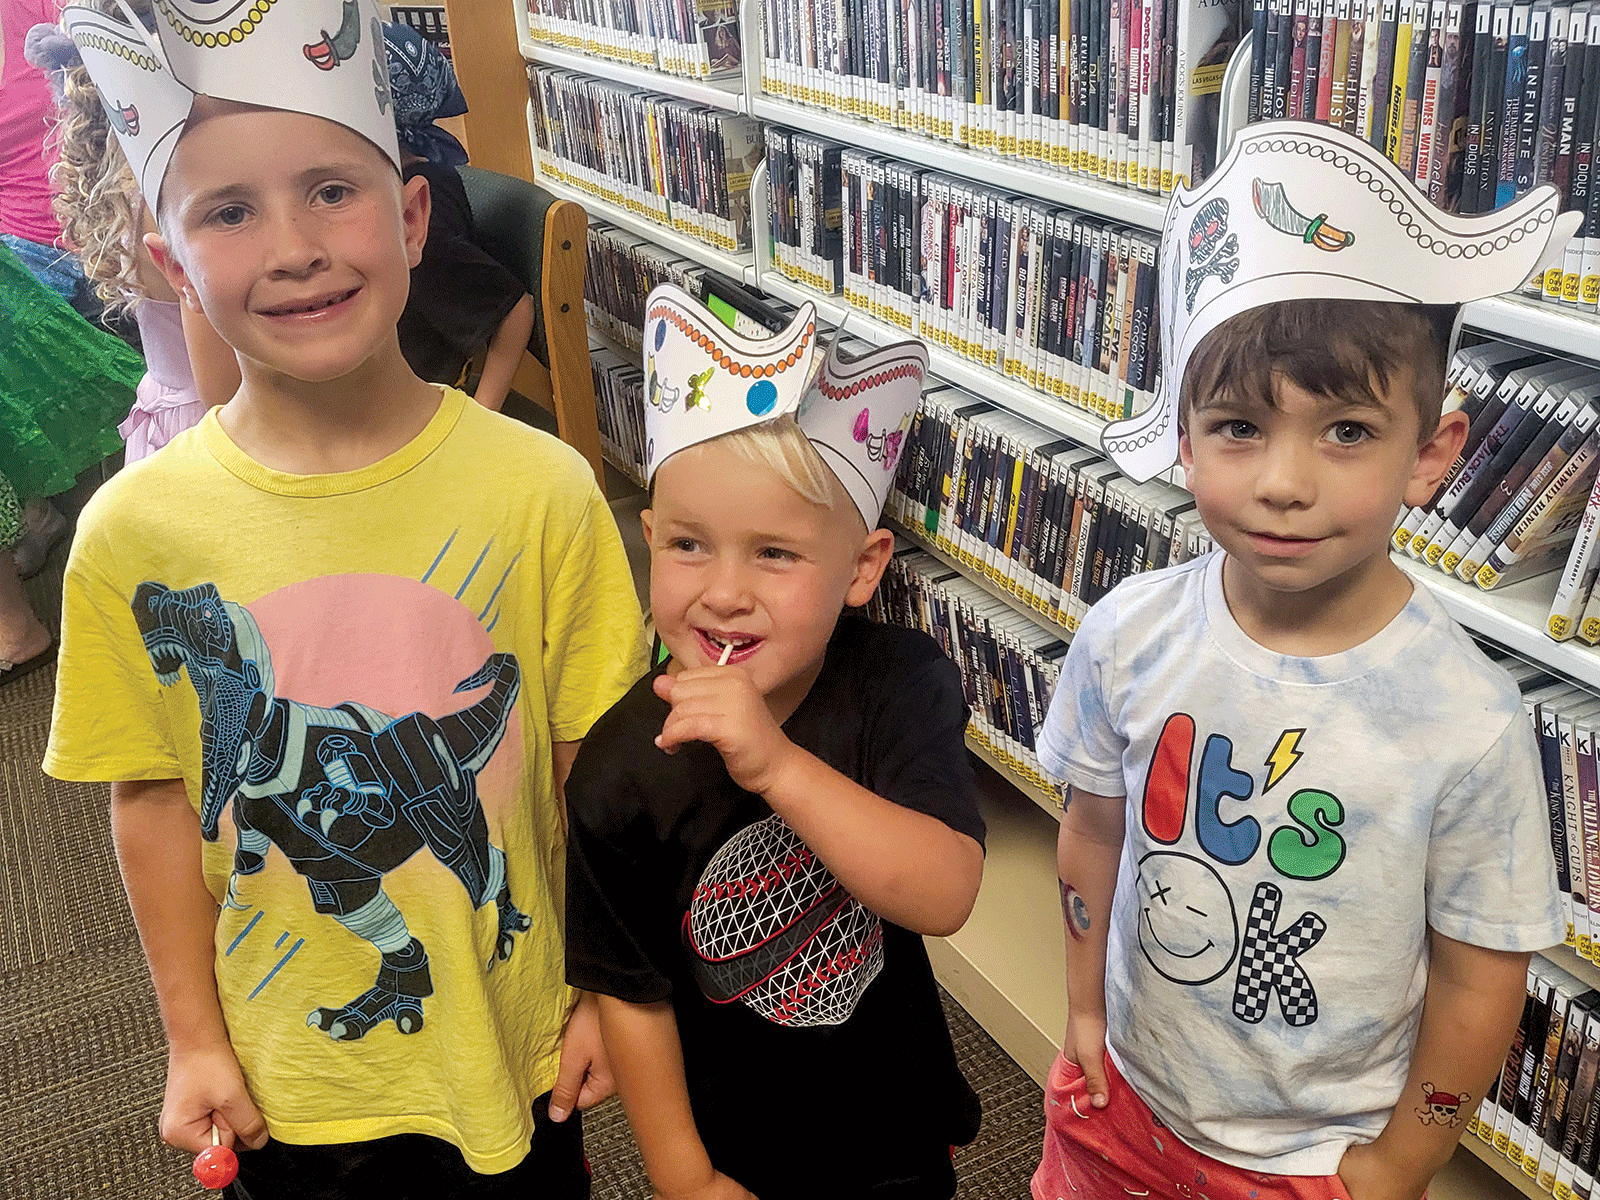 Overton Library filled with pirates and princesses